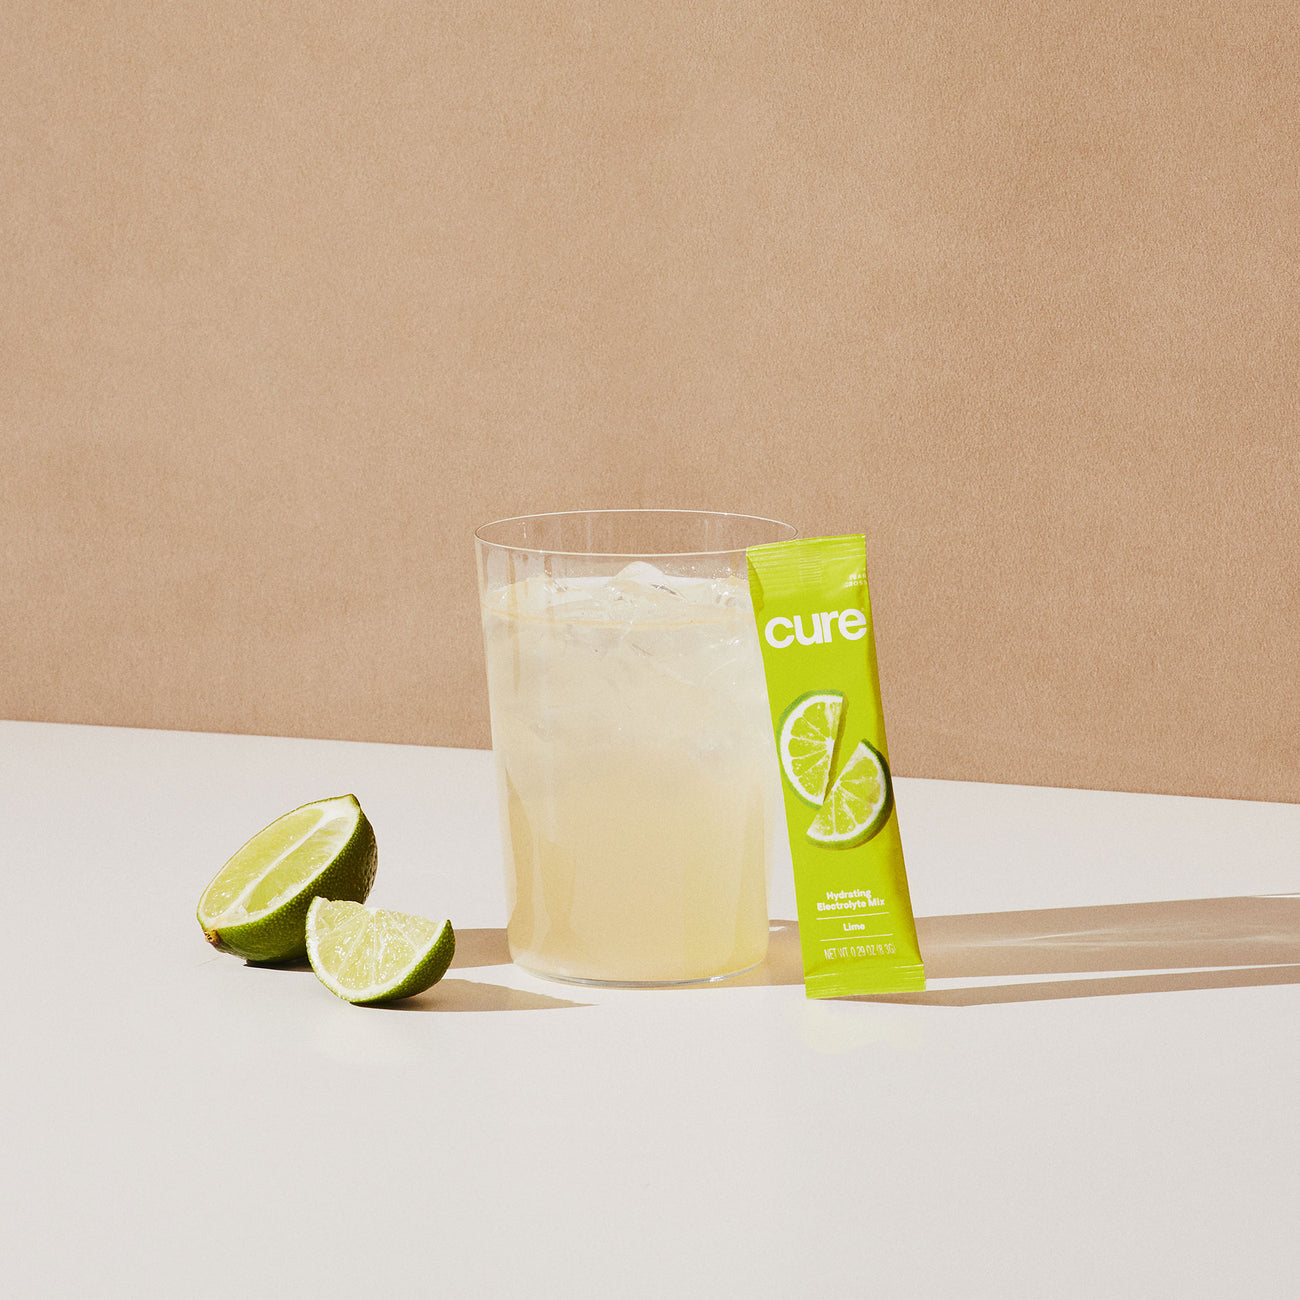 Lime-flavored drink with mix packet and lime slices.